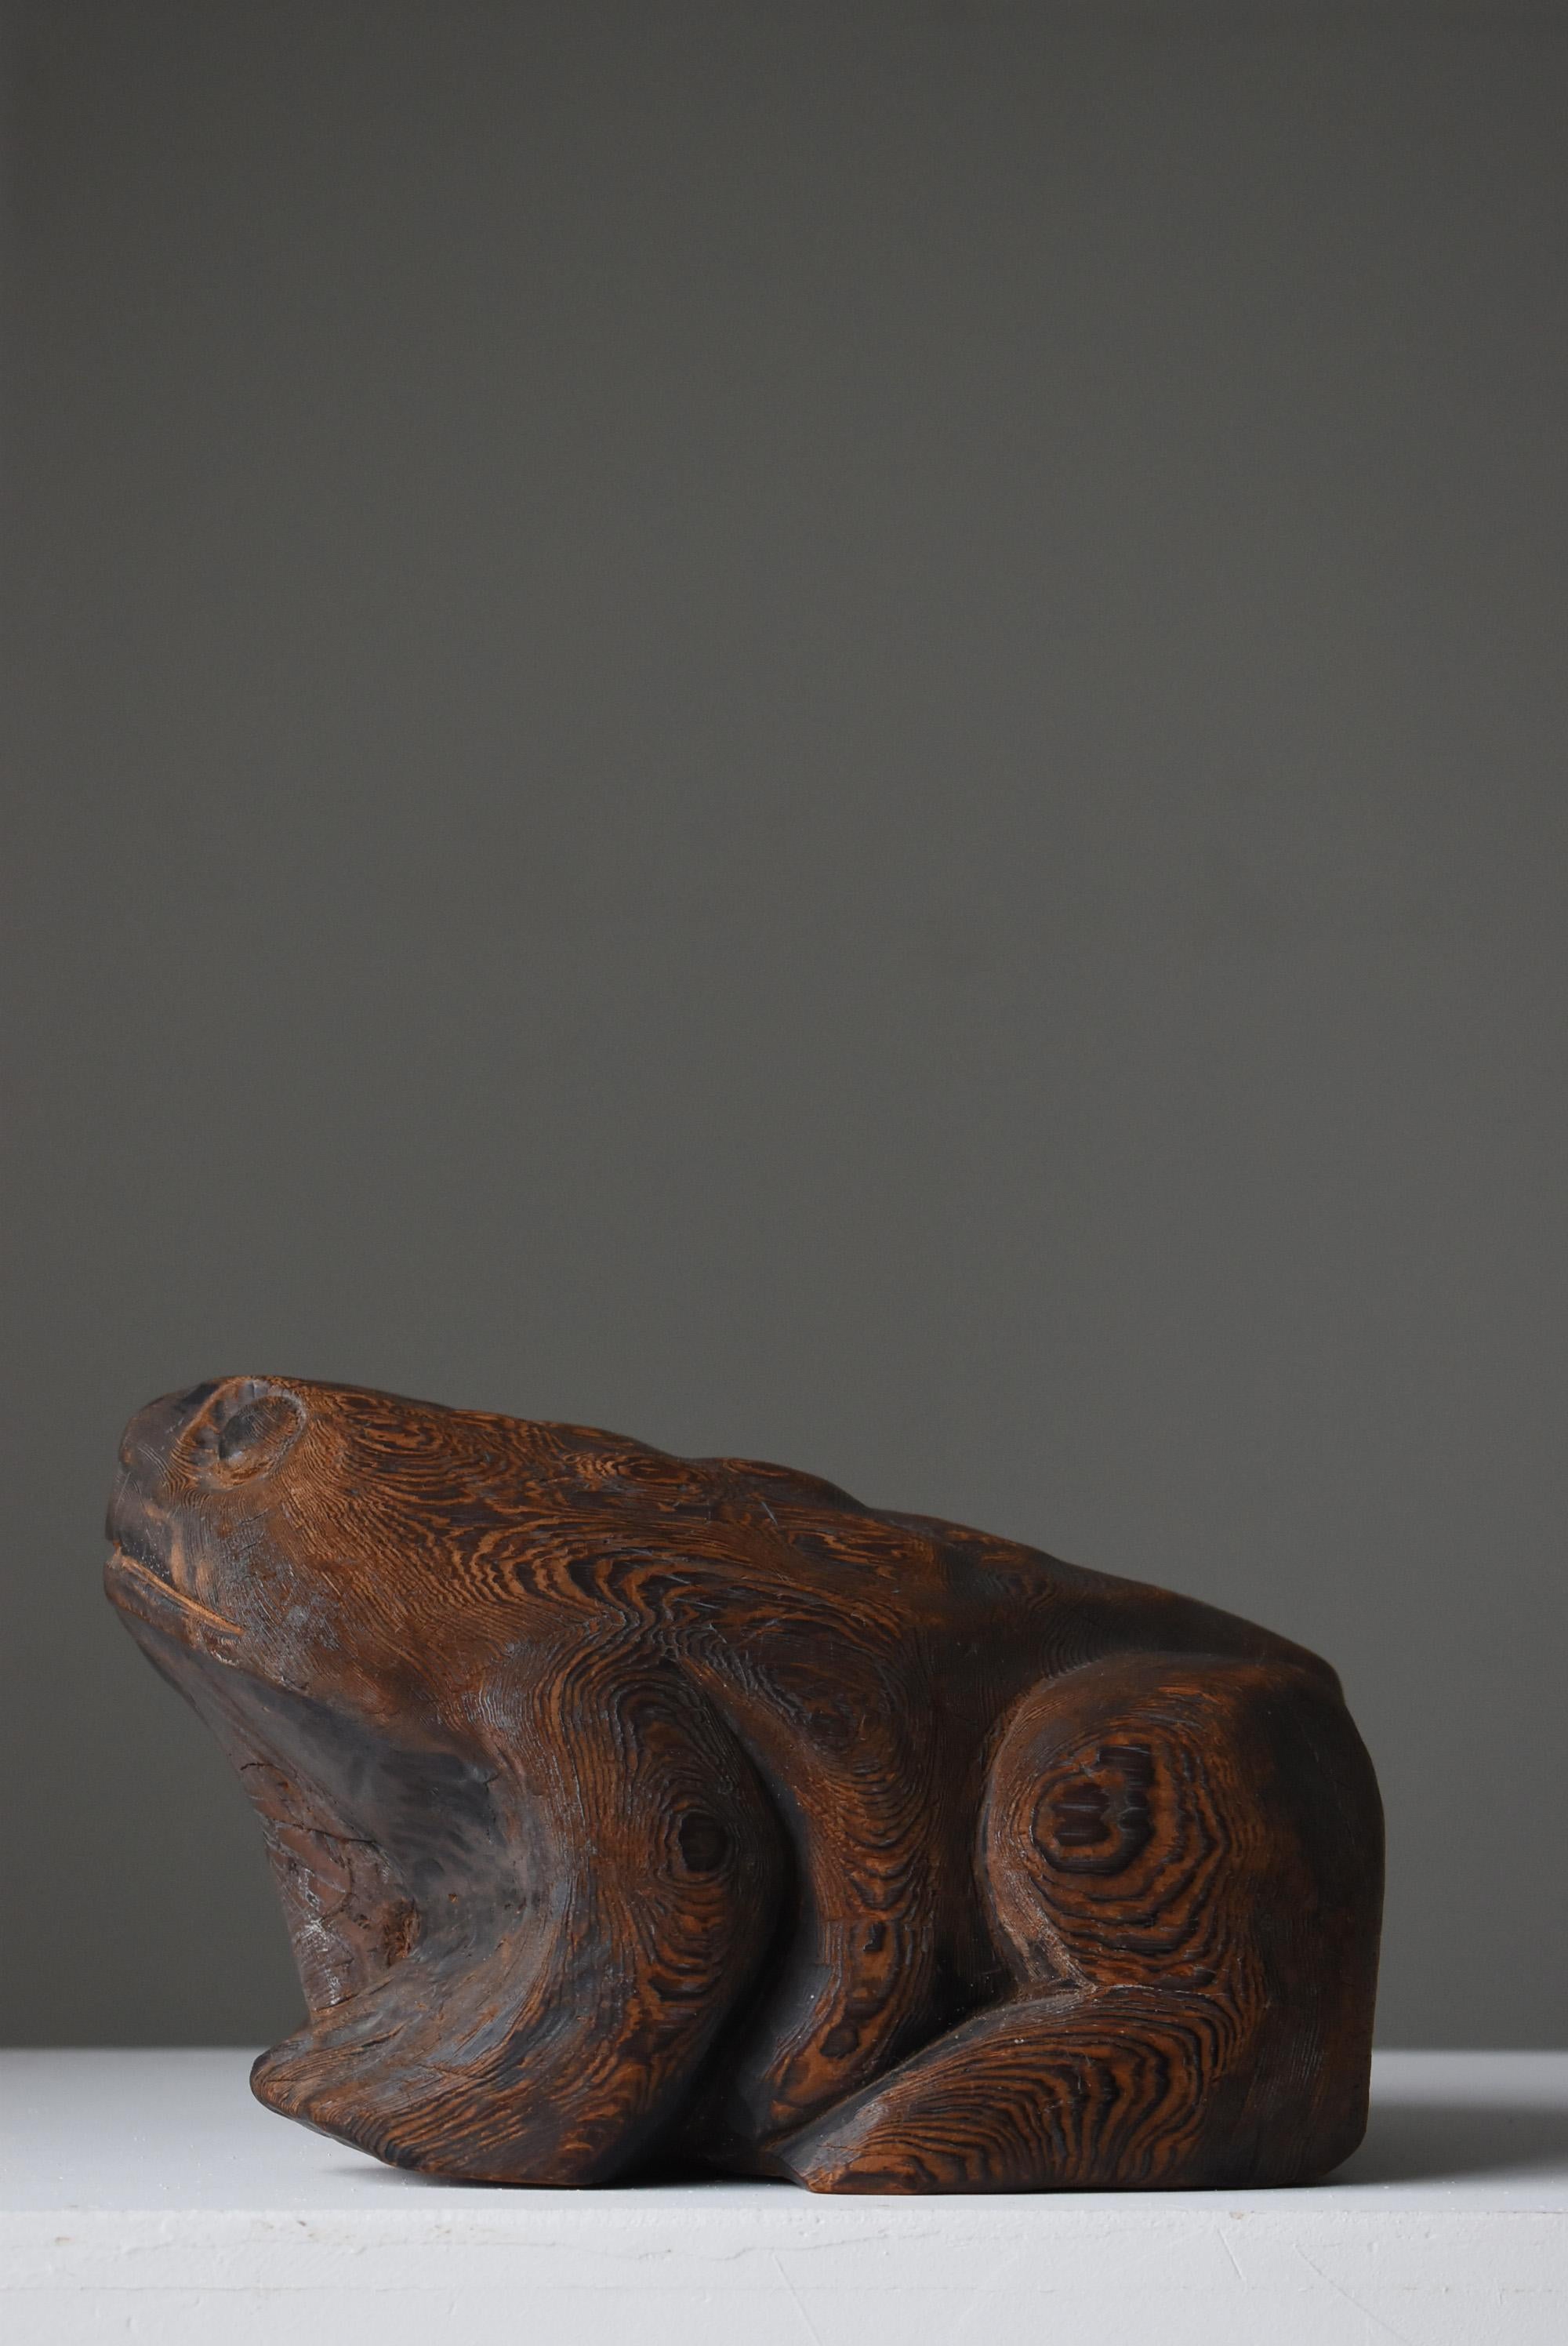 20th Century 1900s-1940s Frog God Japanese Wooden Sculpture Antique Toad Object Wabisabi